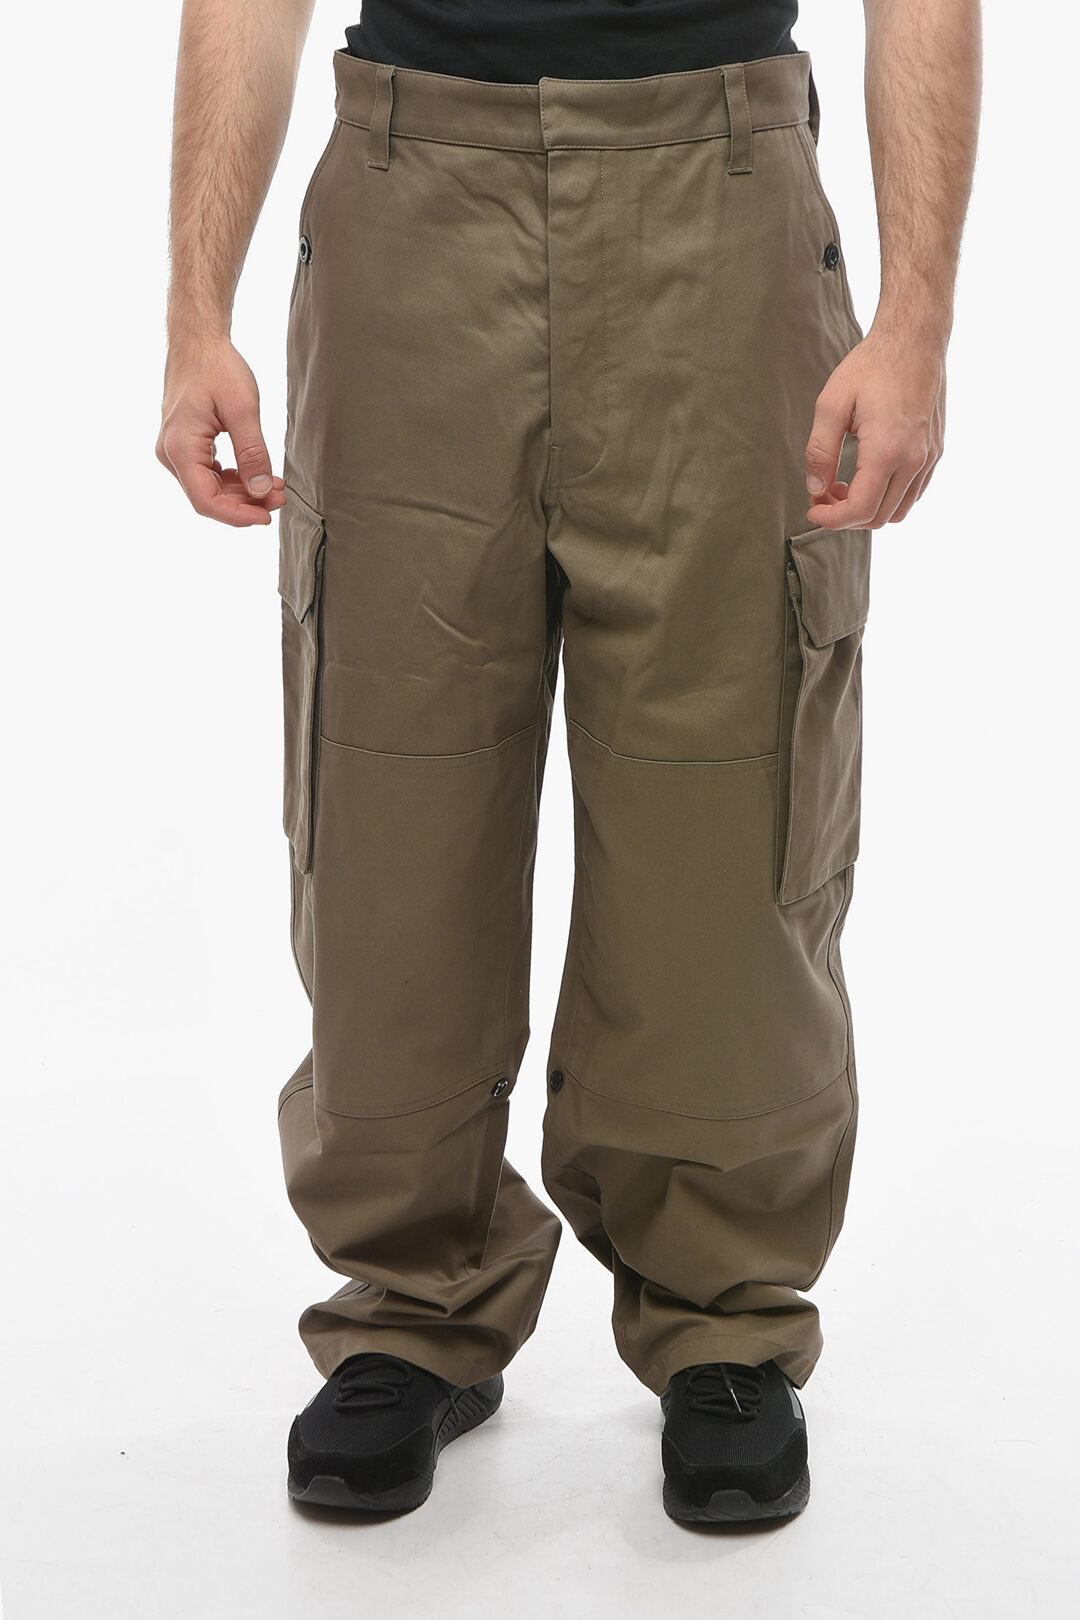 Men's 40 Grit Flex Twill Relaxed Fit Cargo Pants | Duluth Trading Company